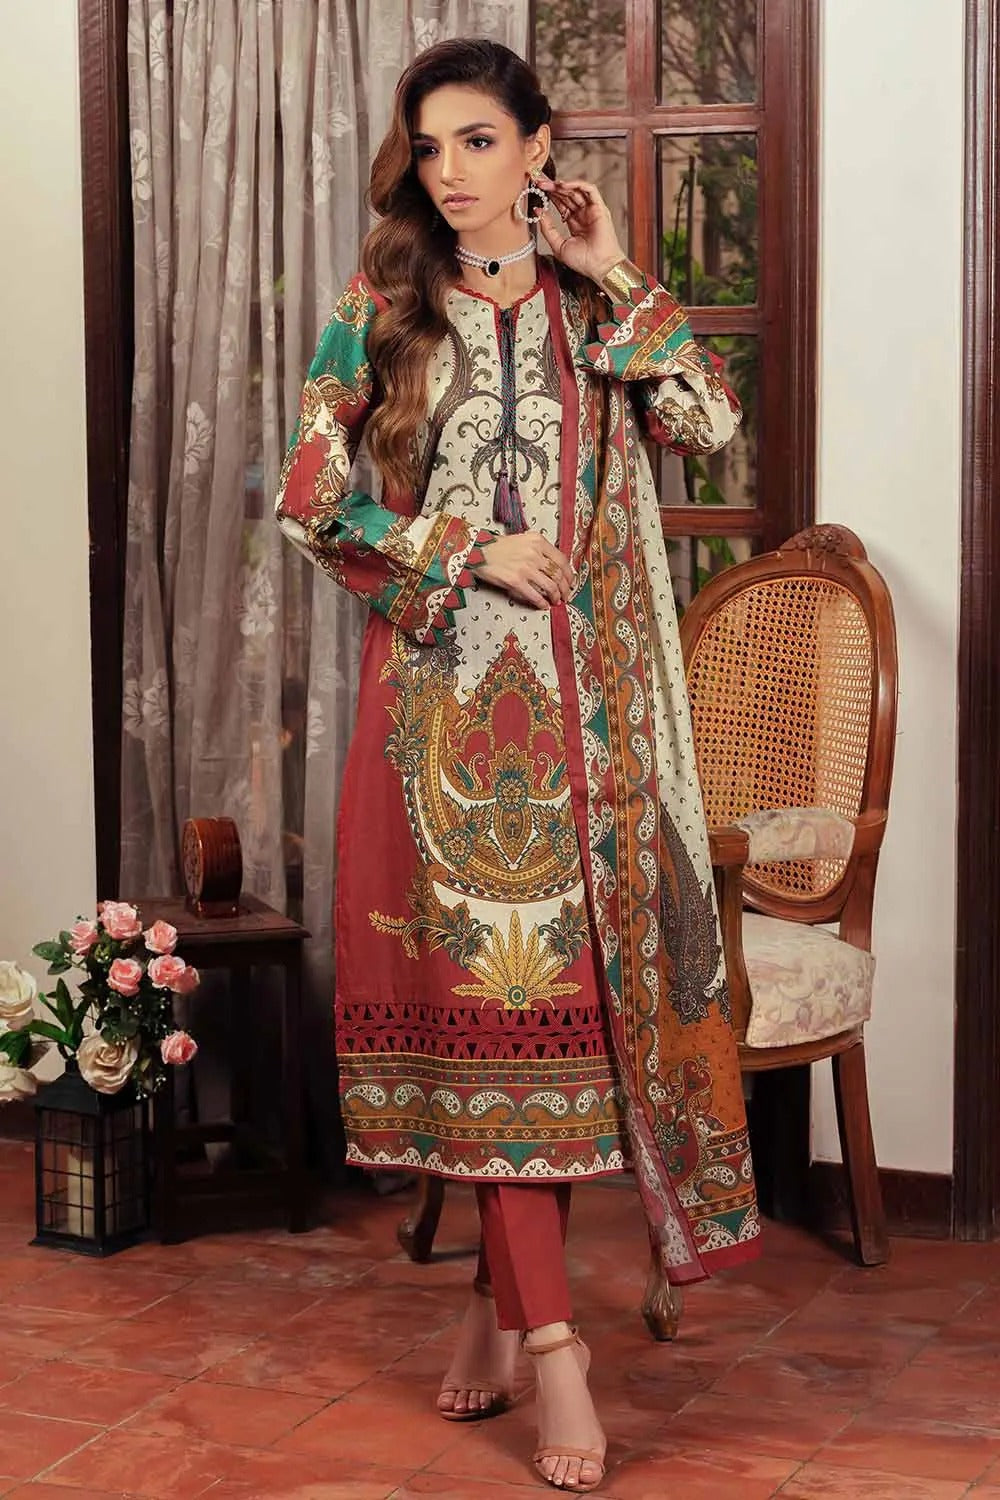 Gul Ahmed 2PC Unstitched Cotton Printed Suit TCN-22006